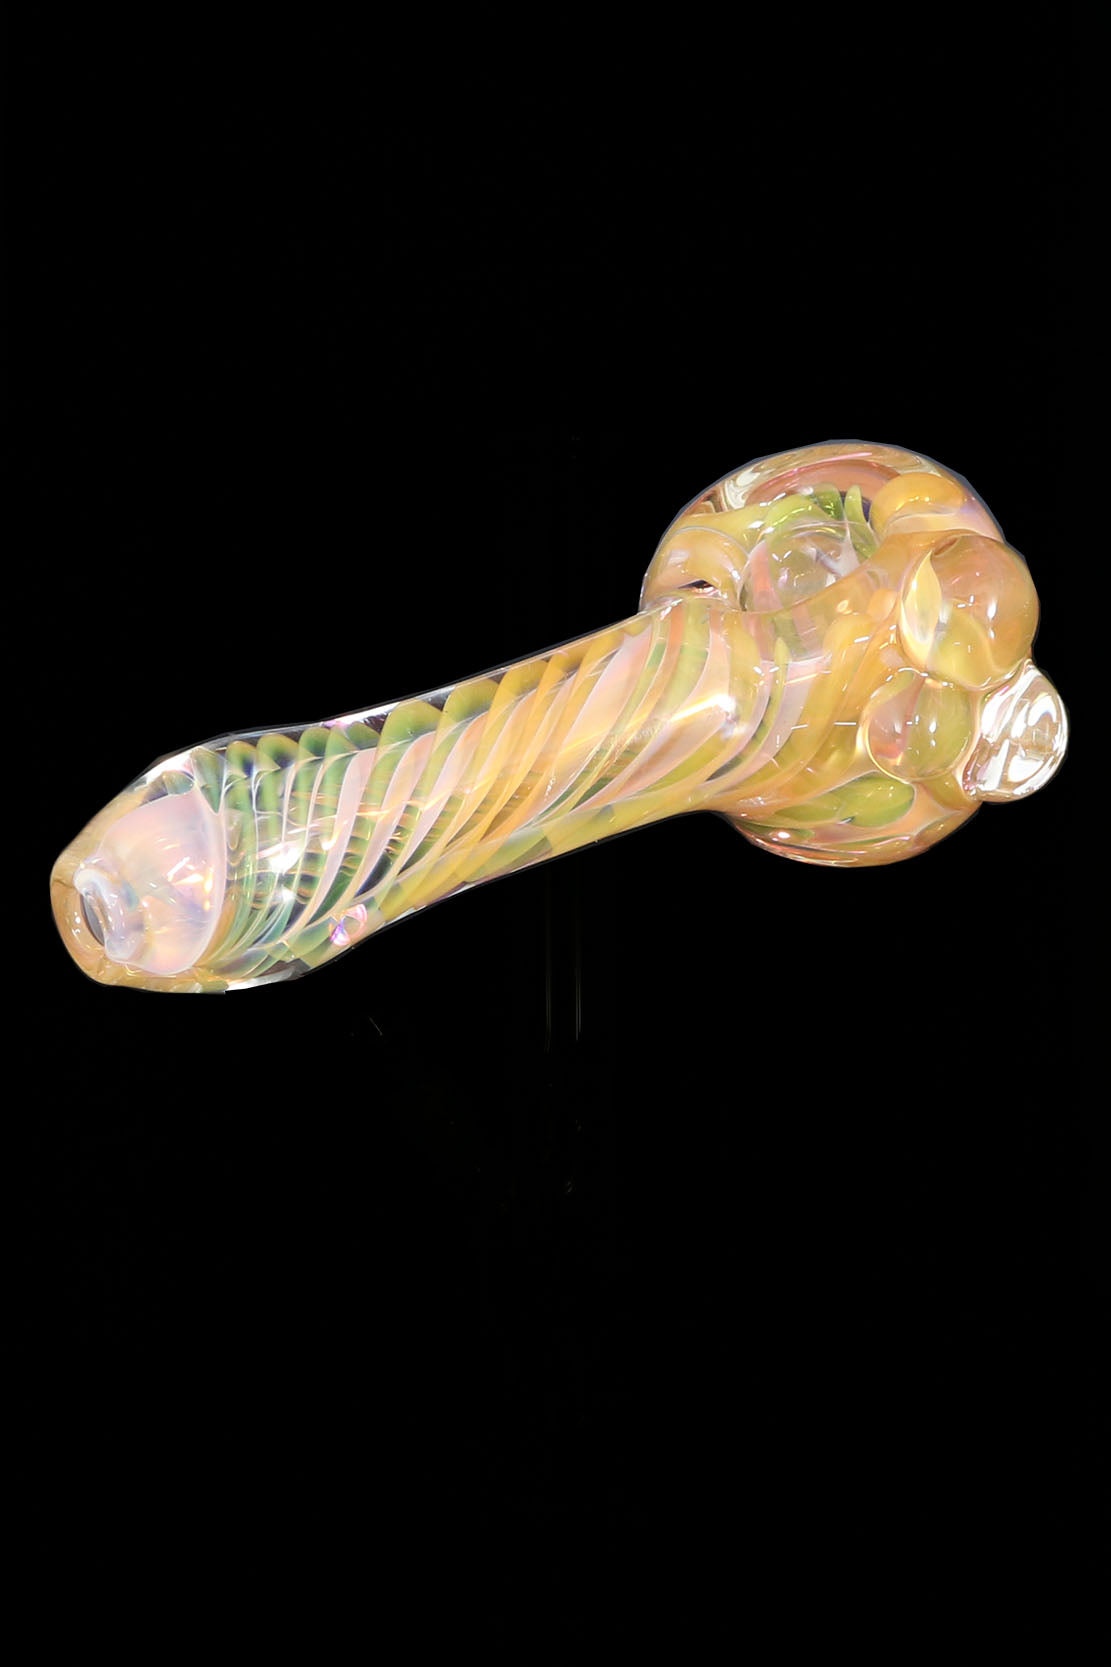 Fumed inside out Spoon pipe by, Ck_glass